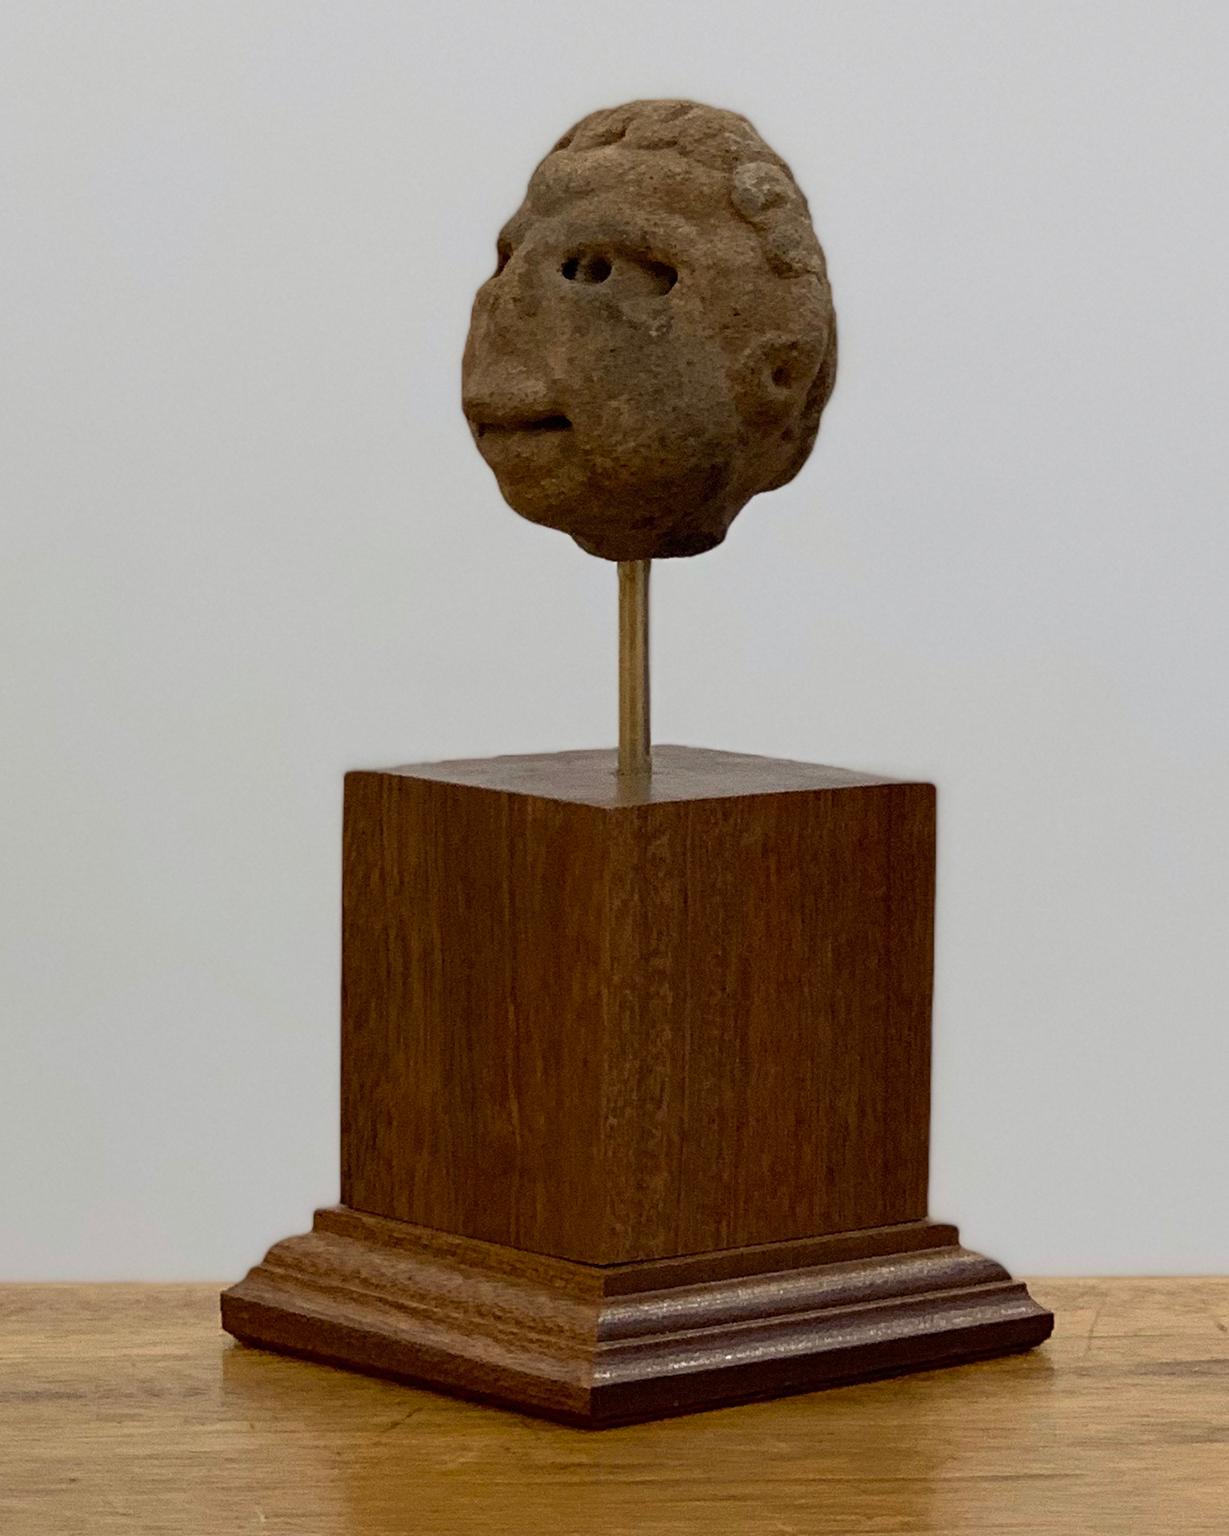 Pre Columbian Mesoamerica clay head, Veracruz Culture Approximatly 600 - 900 BCE - Tribal Sculpture by Unknown